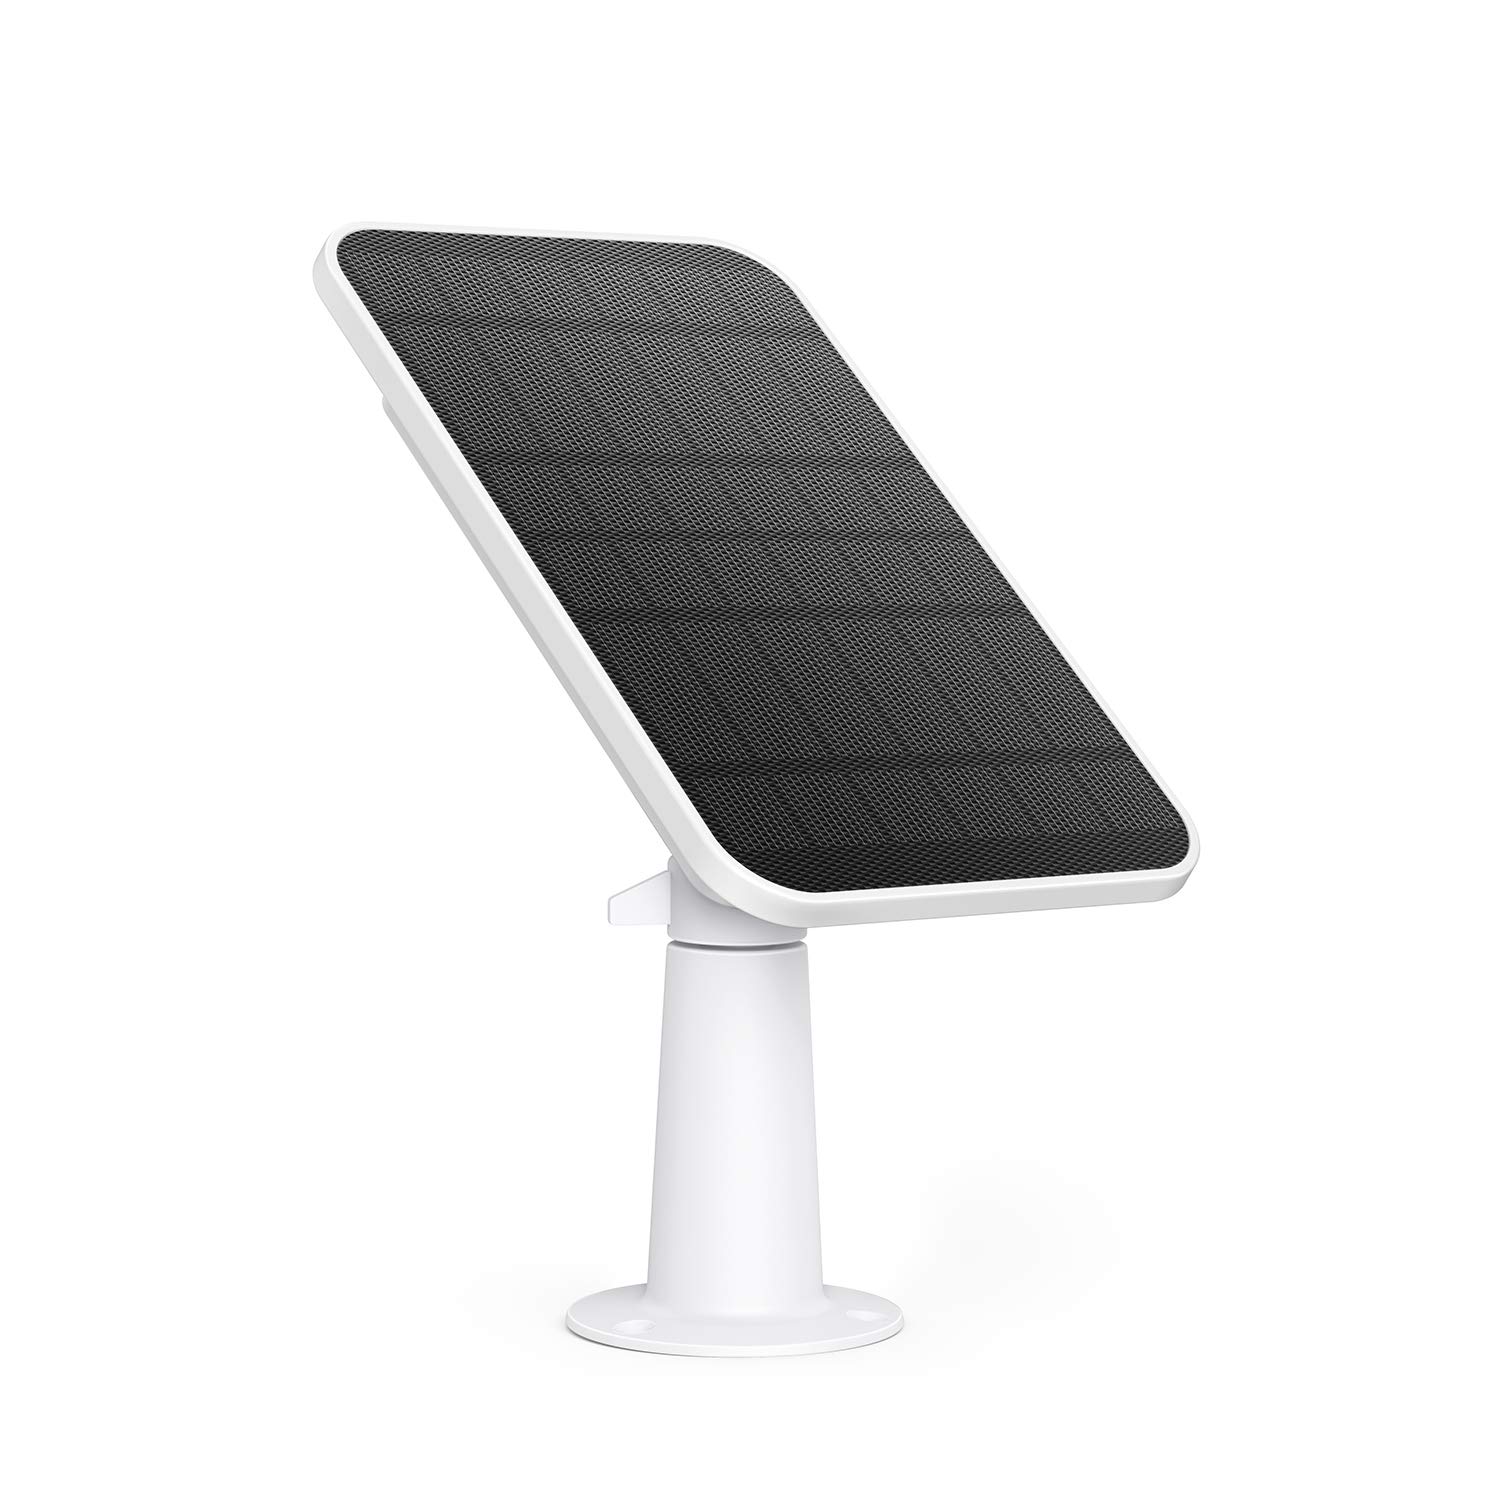 Boost eufyCam with eufy Security Certified Solar Panel - Uninterrupted Power Supply, 2.6W, IP65 Weatherproof